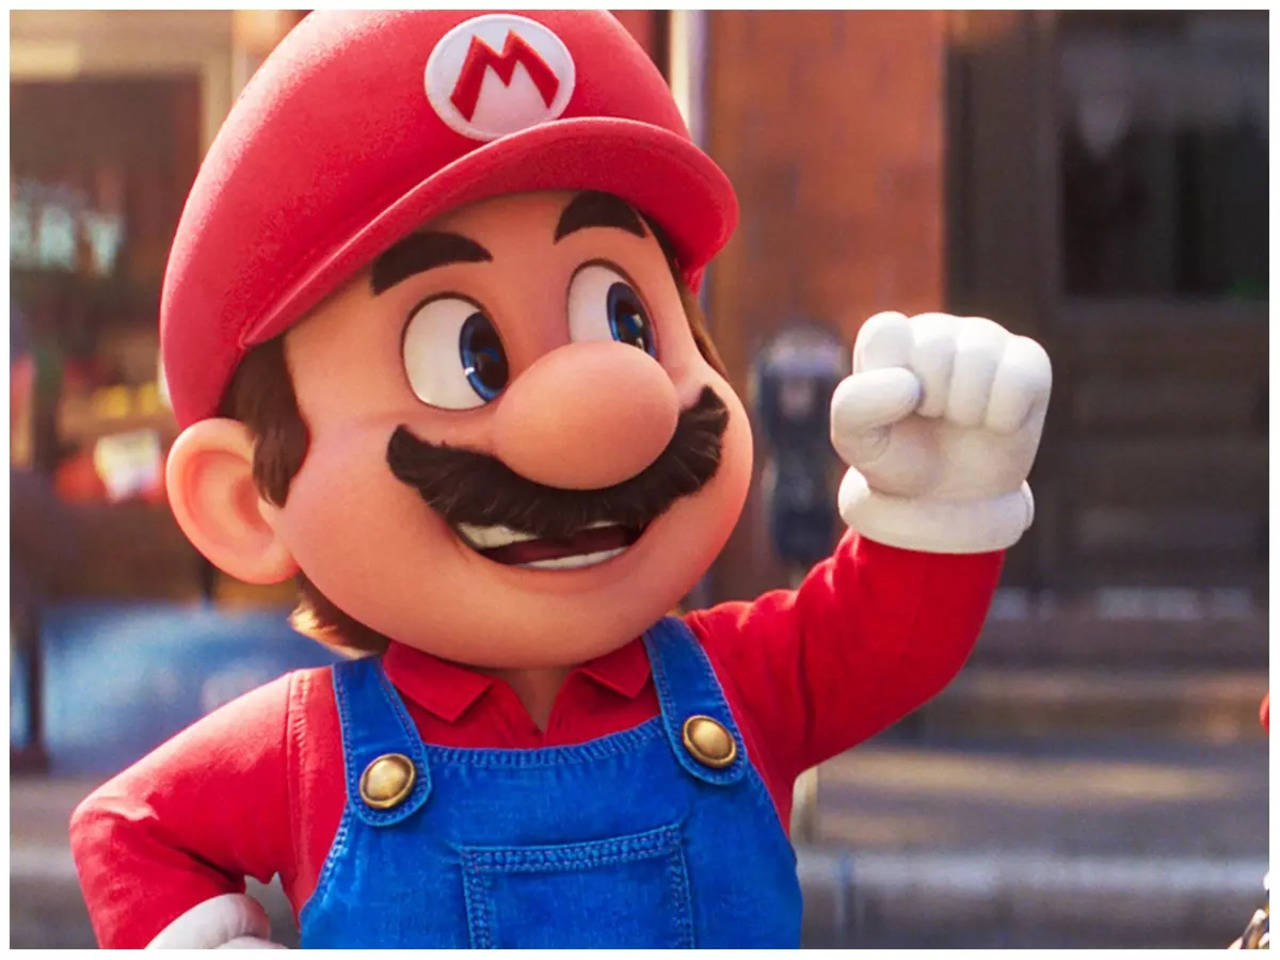 Analyst: Nintendo may earn more than $1 billion from Mario movie